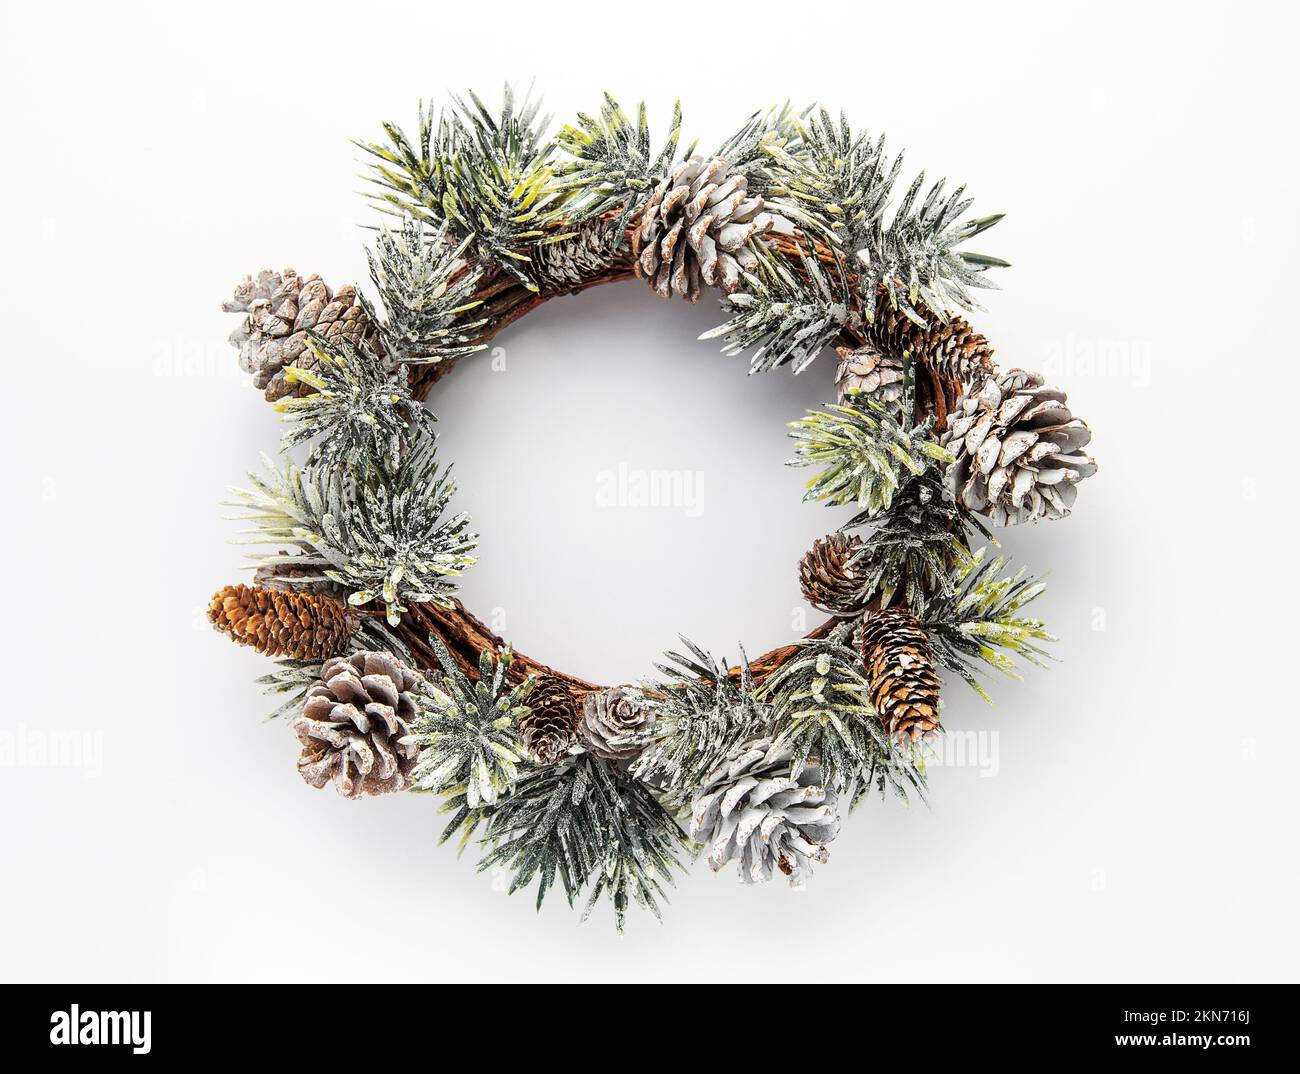 Decorative festive Christmas wreath.  Wreath made of fir tree and cones  on white background.  Christmas decorations Stock Photo